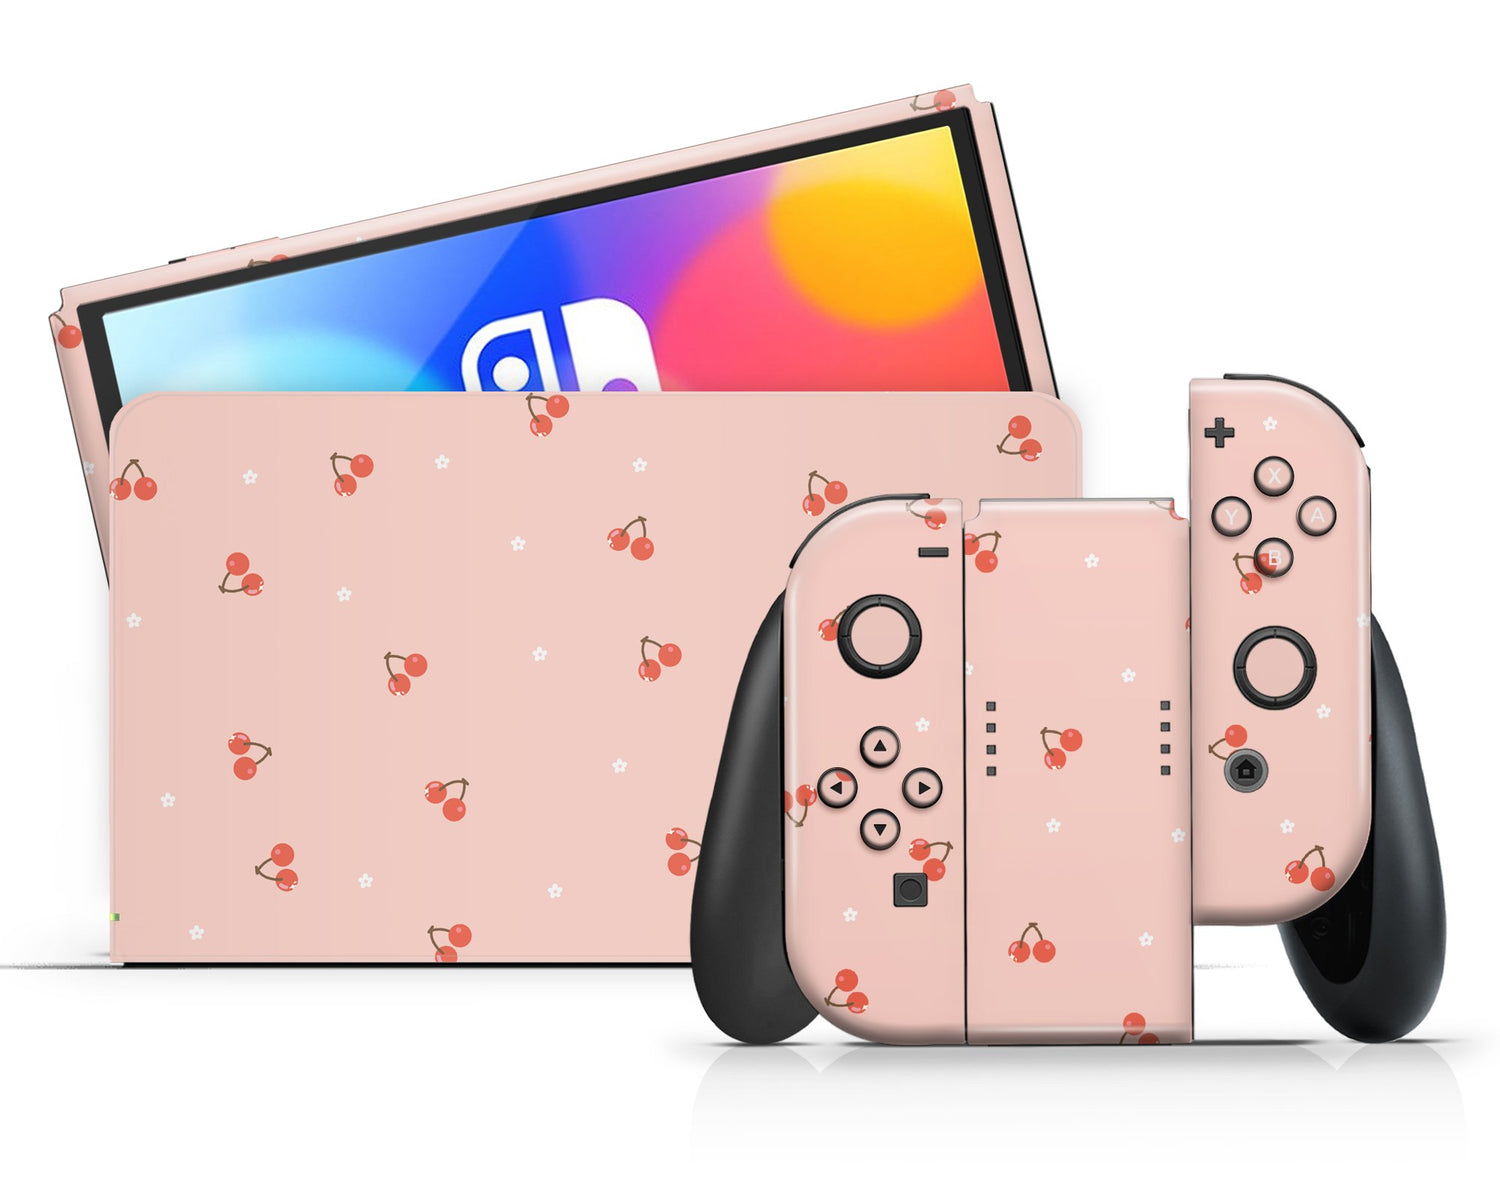 Lux Skins Nintendo Switch OLED Animal Crossing Cherry Classic no logo Skins - Pop culture Animal Crossing Skin